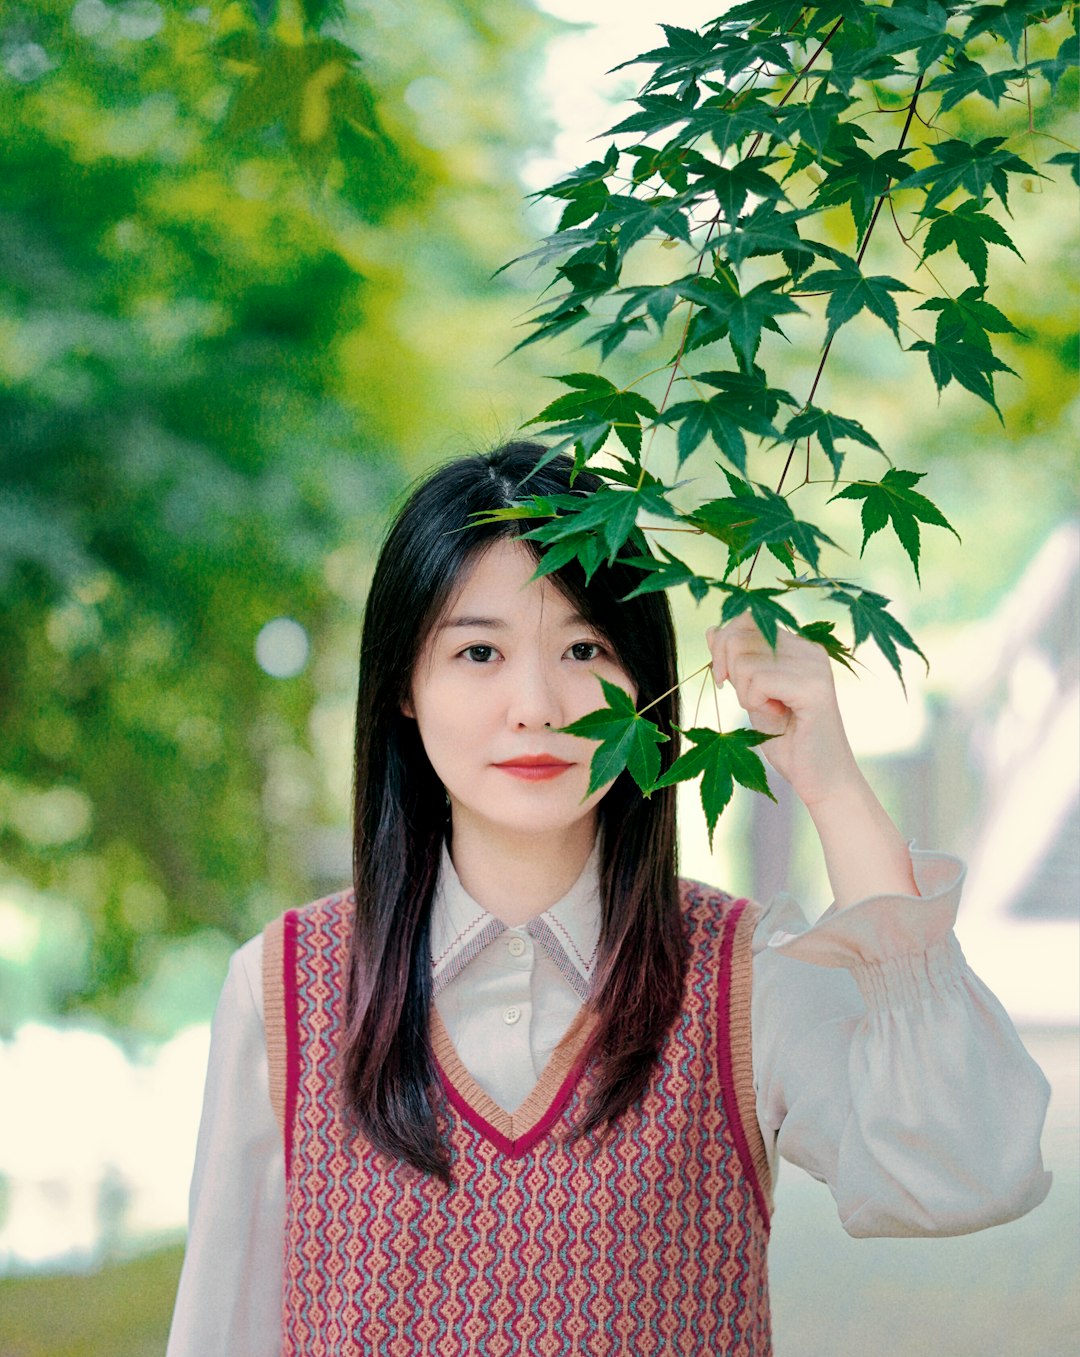 woman in white and red shirt holding green leaves